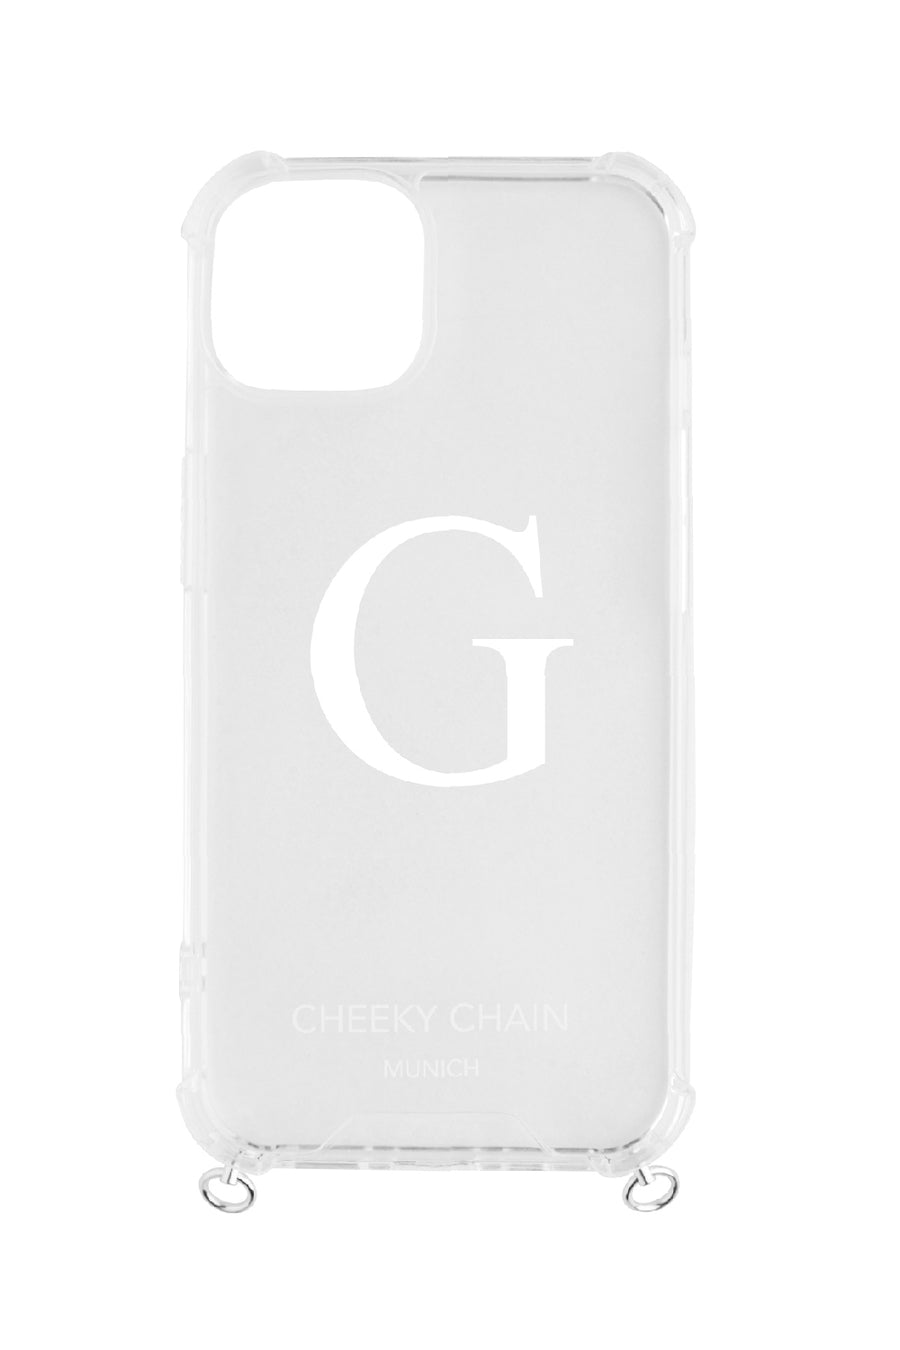 Mobile phone case crystal clear personalized